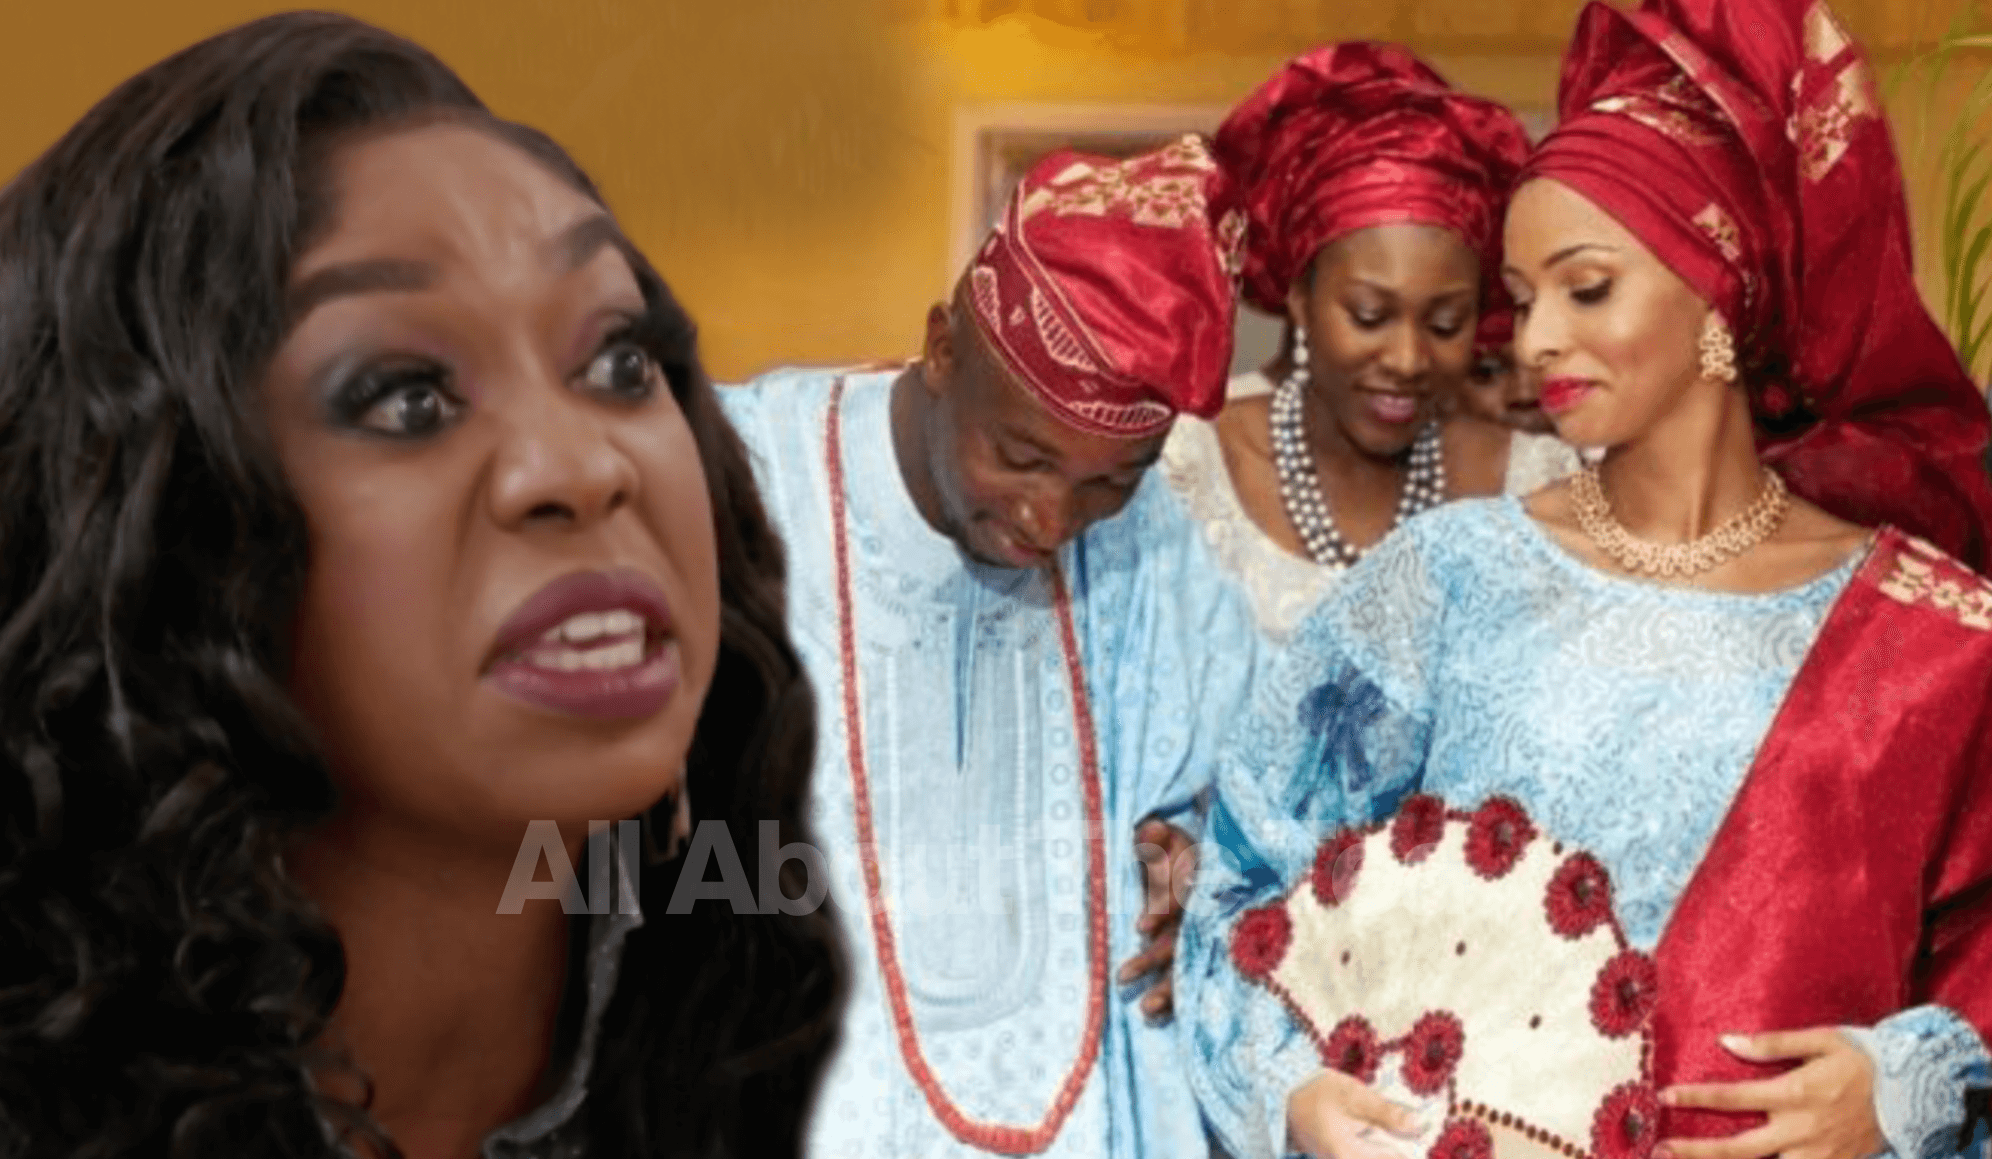 EXCLUSIVE: Wendy Osefo’s Nigerian Family Cursed, Shunned By Villagers PLUS Her Massive Debt EXPOSED!